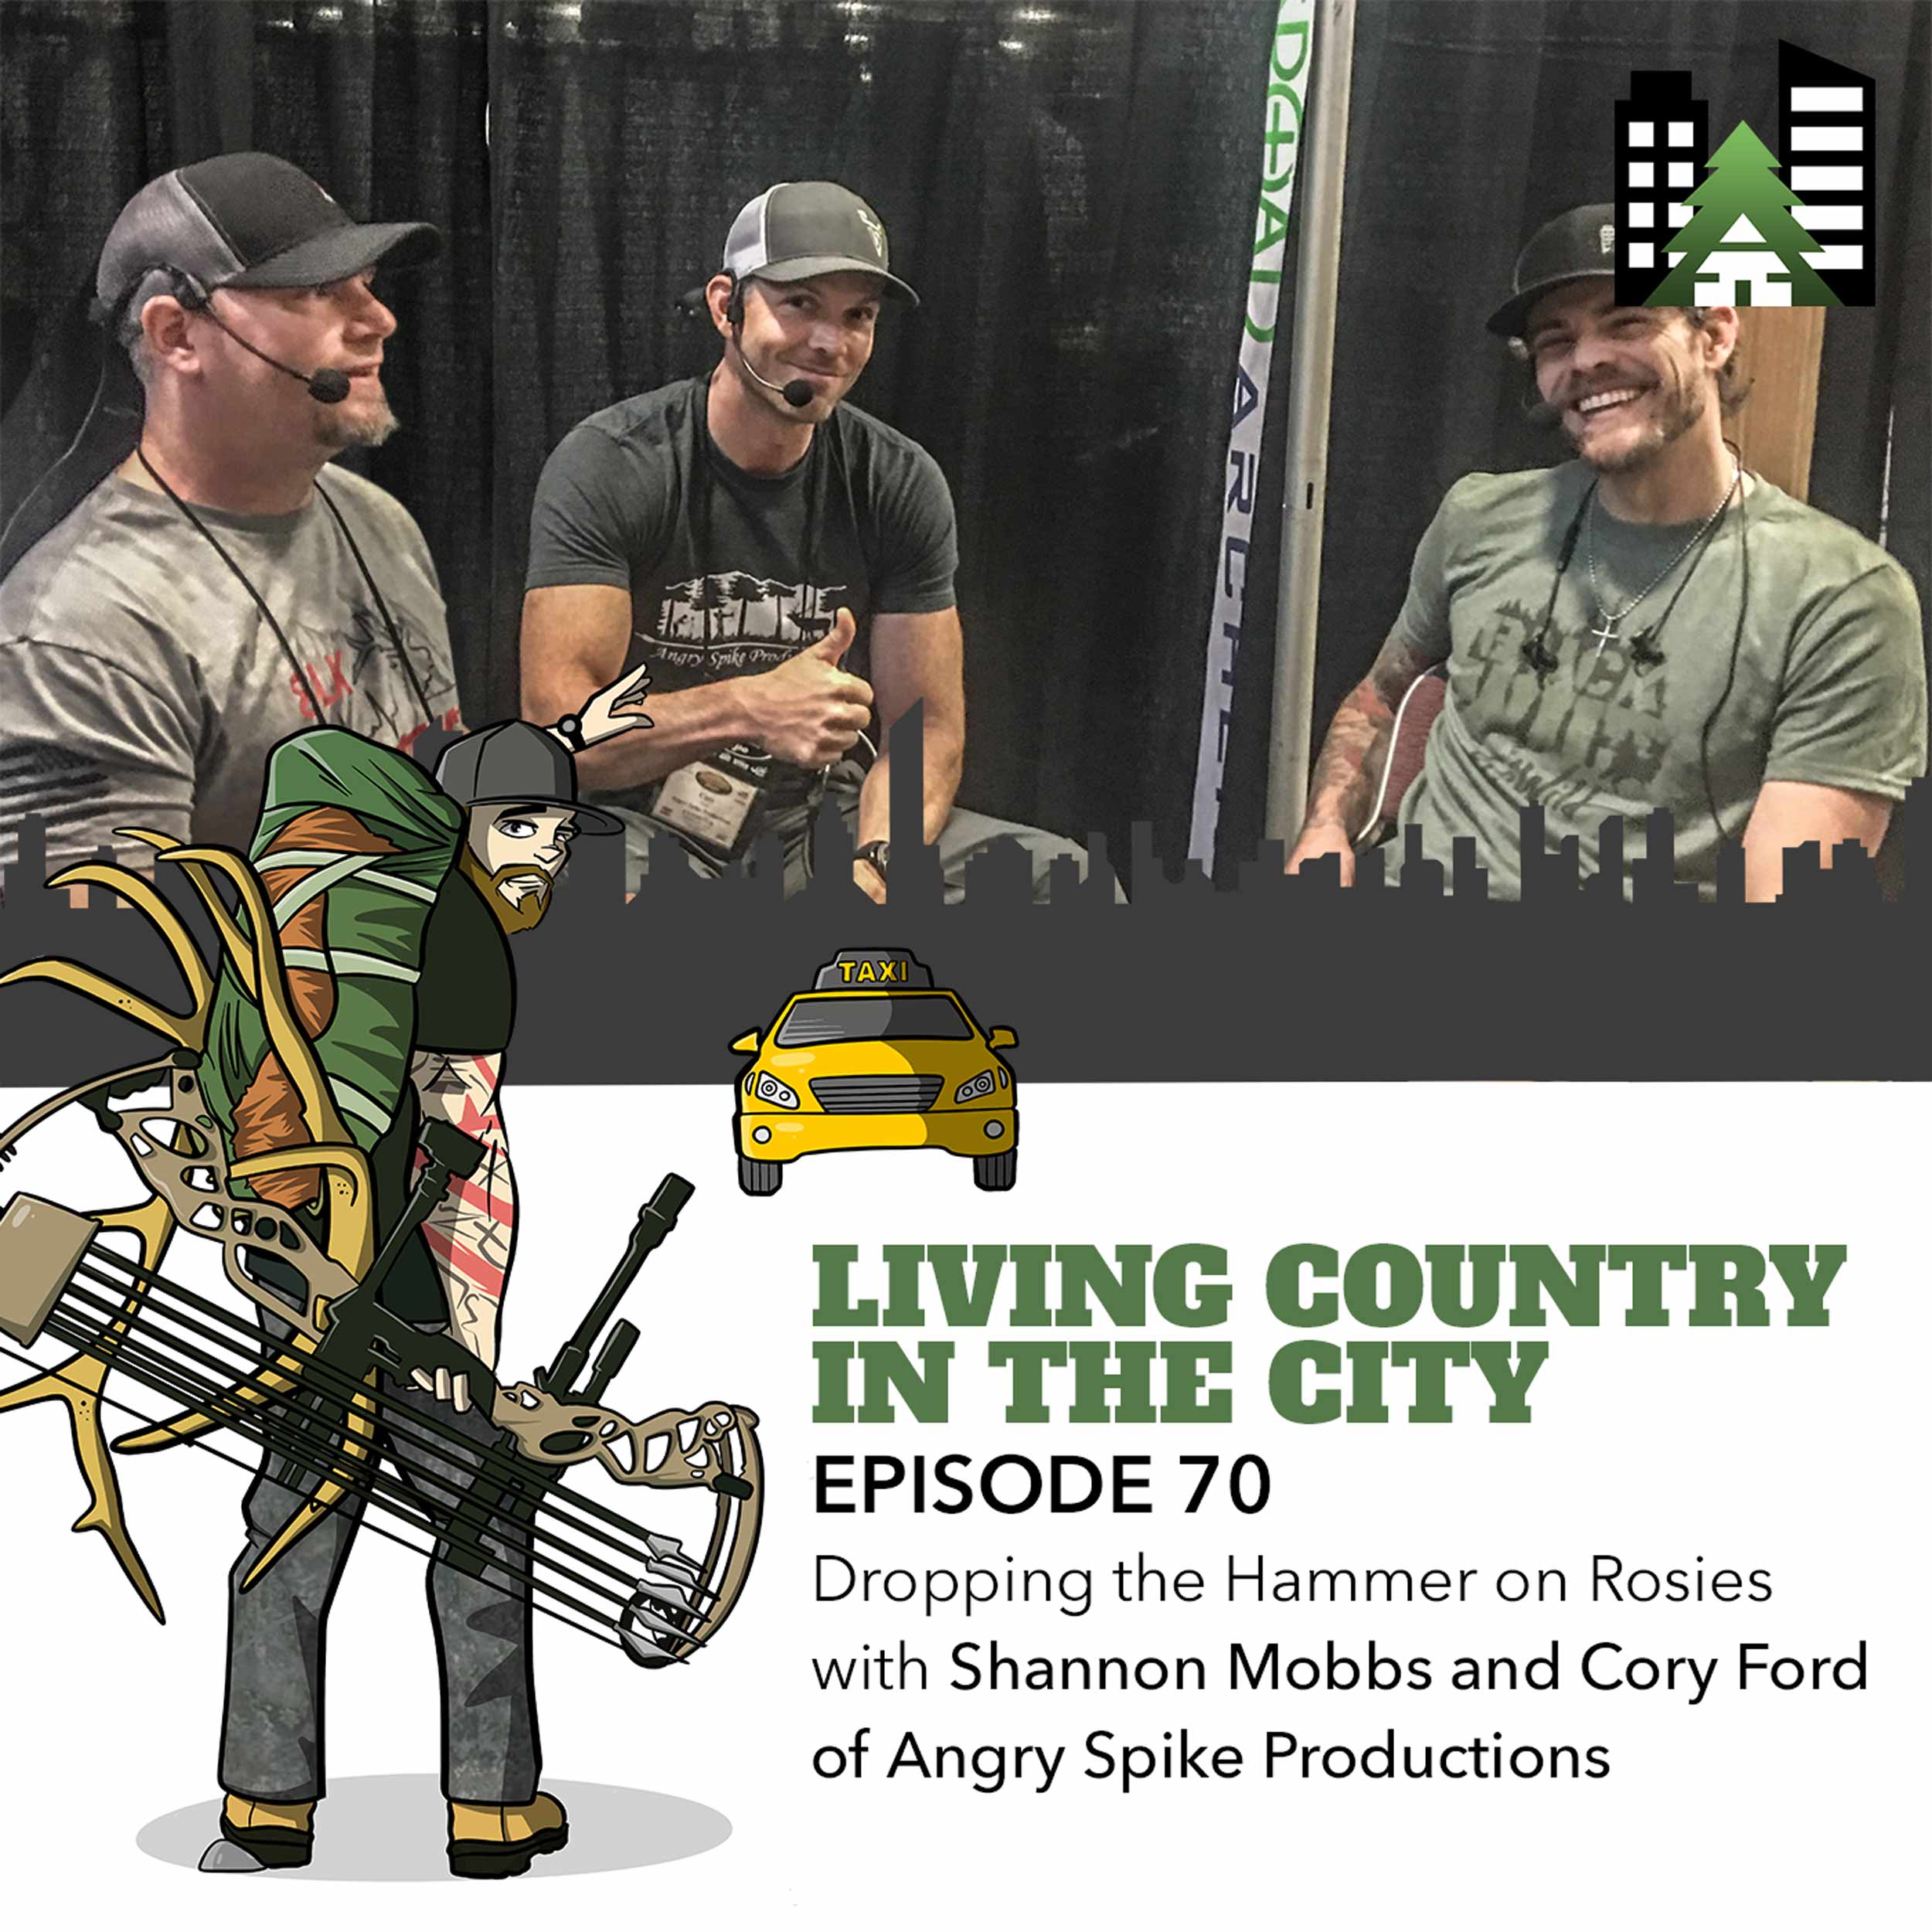 Ep 70 - Dropping the Hammer on Rosies with Shannon Mobbs and Cory Ford of Angry Spike Productions